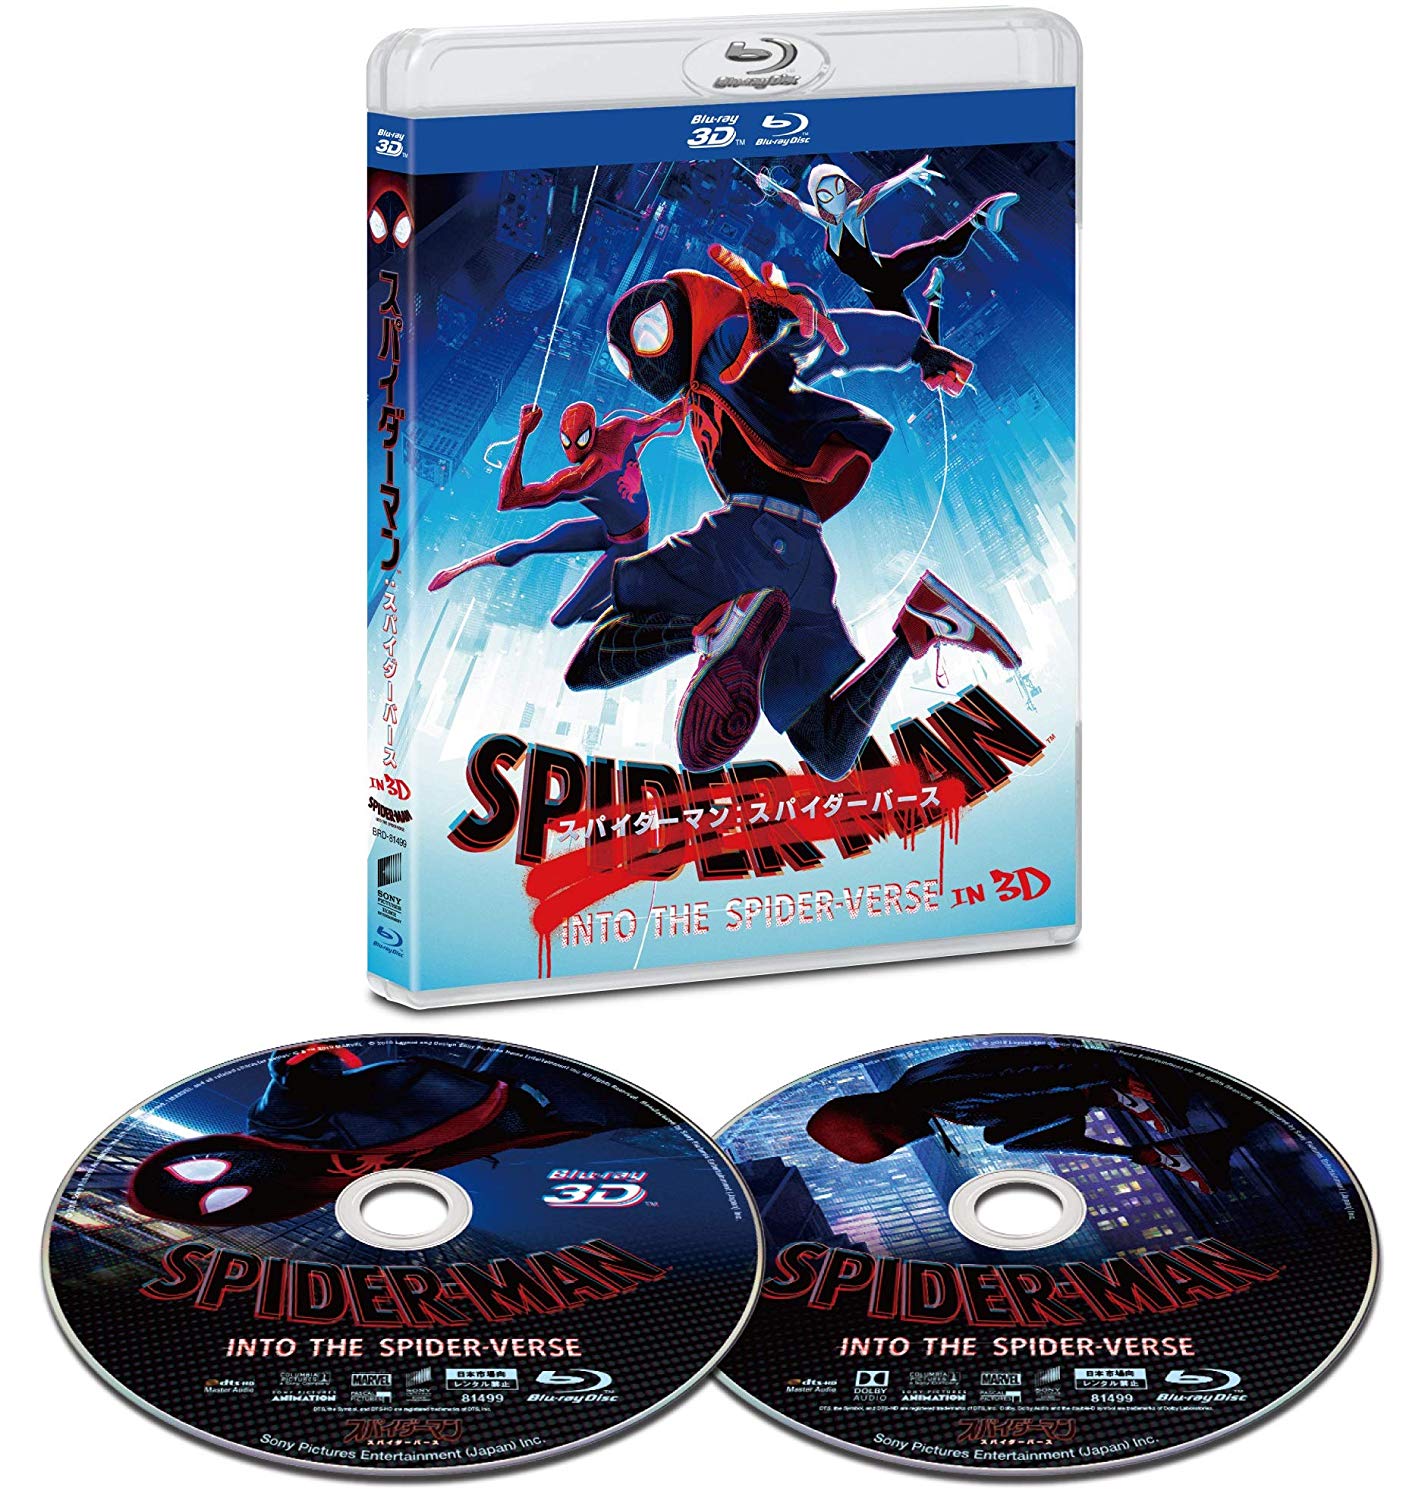 Ultra Hd Blu Ray The Japanese Edition Of Spider Man Into The Spider Verse Is Finally Listed On Amazon Japan There Are Separate Ultra Hd Blu Ray And 3d Blu Ray Releases Both Bunled